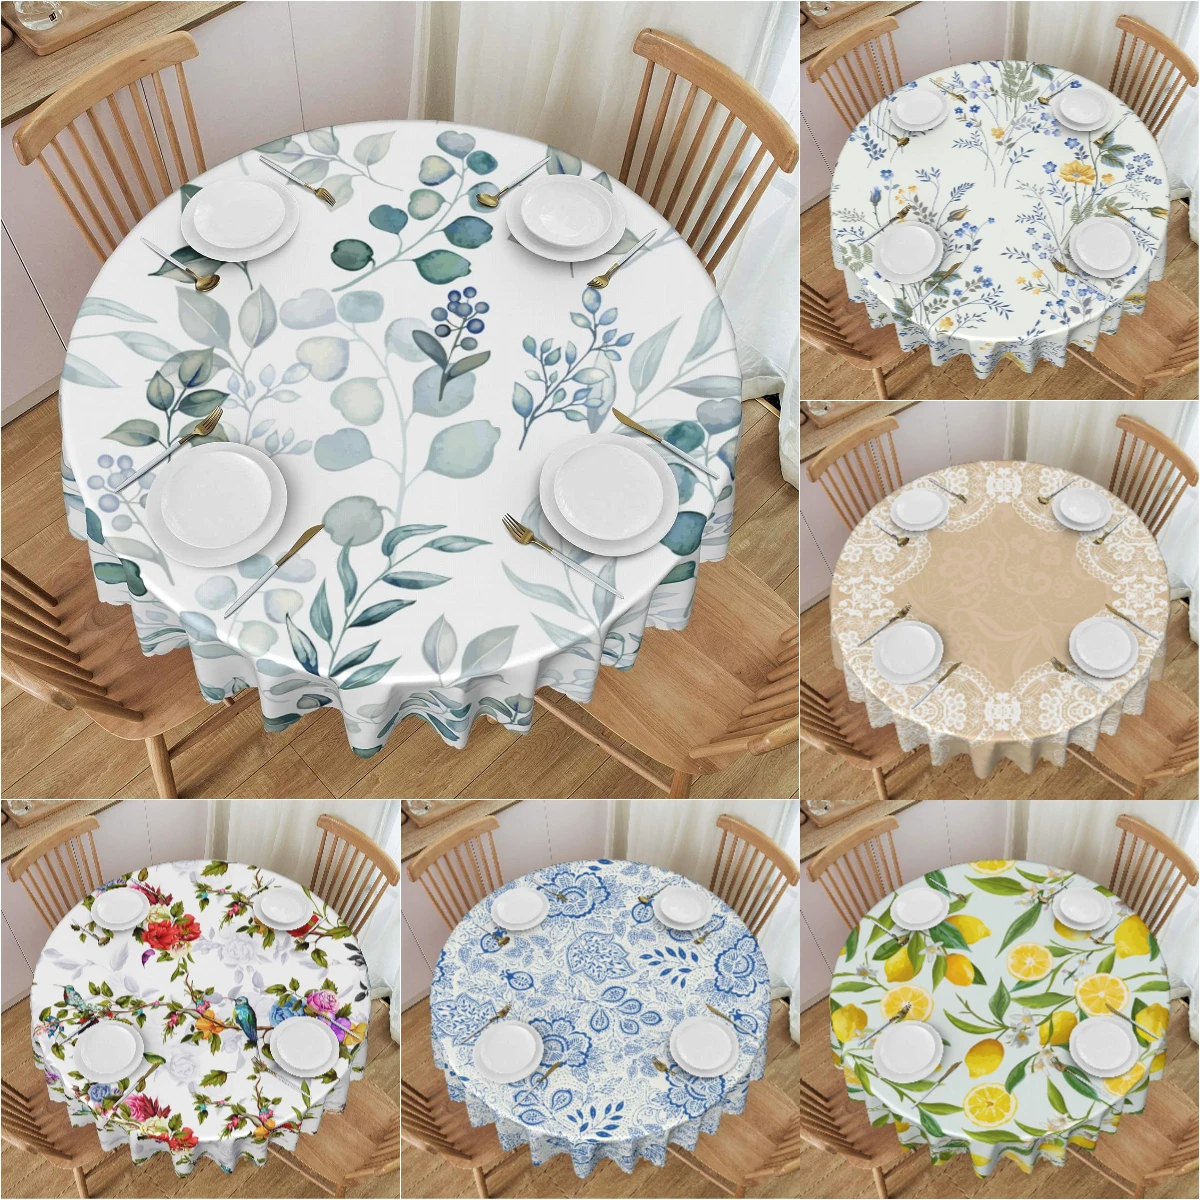 

Eucalyptus and Green Leaves Round Tablecloth Watercolor Flower Waterproof Polyester Table Cloth Cover for Outdoor Kitchen Decor